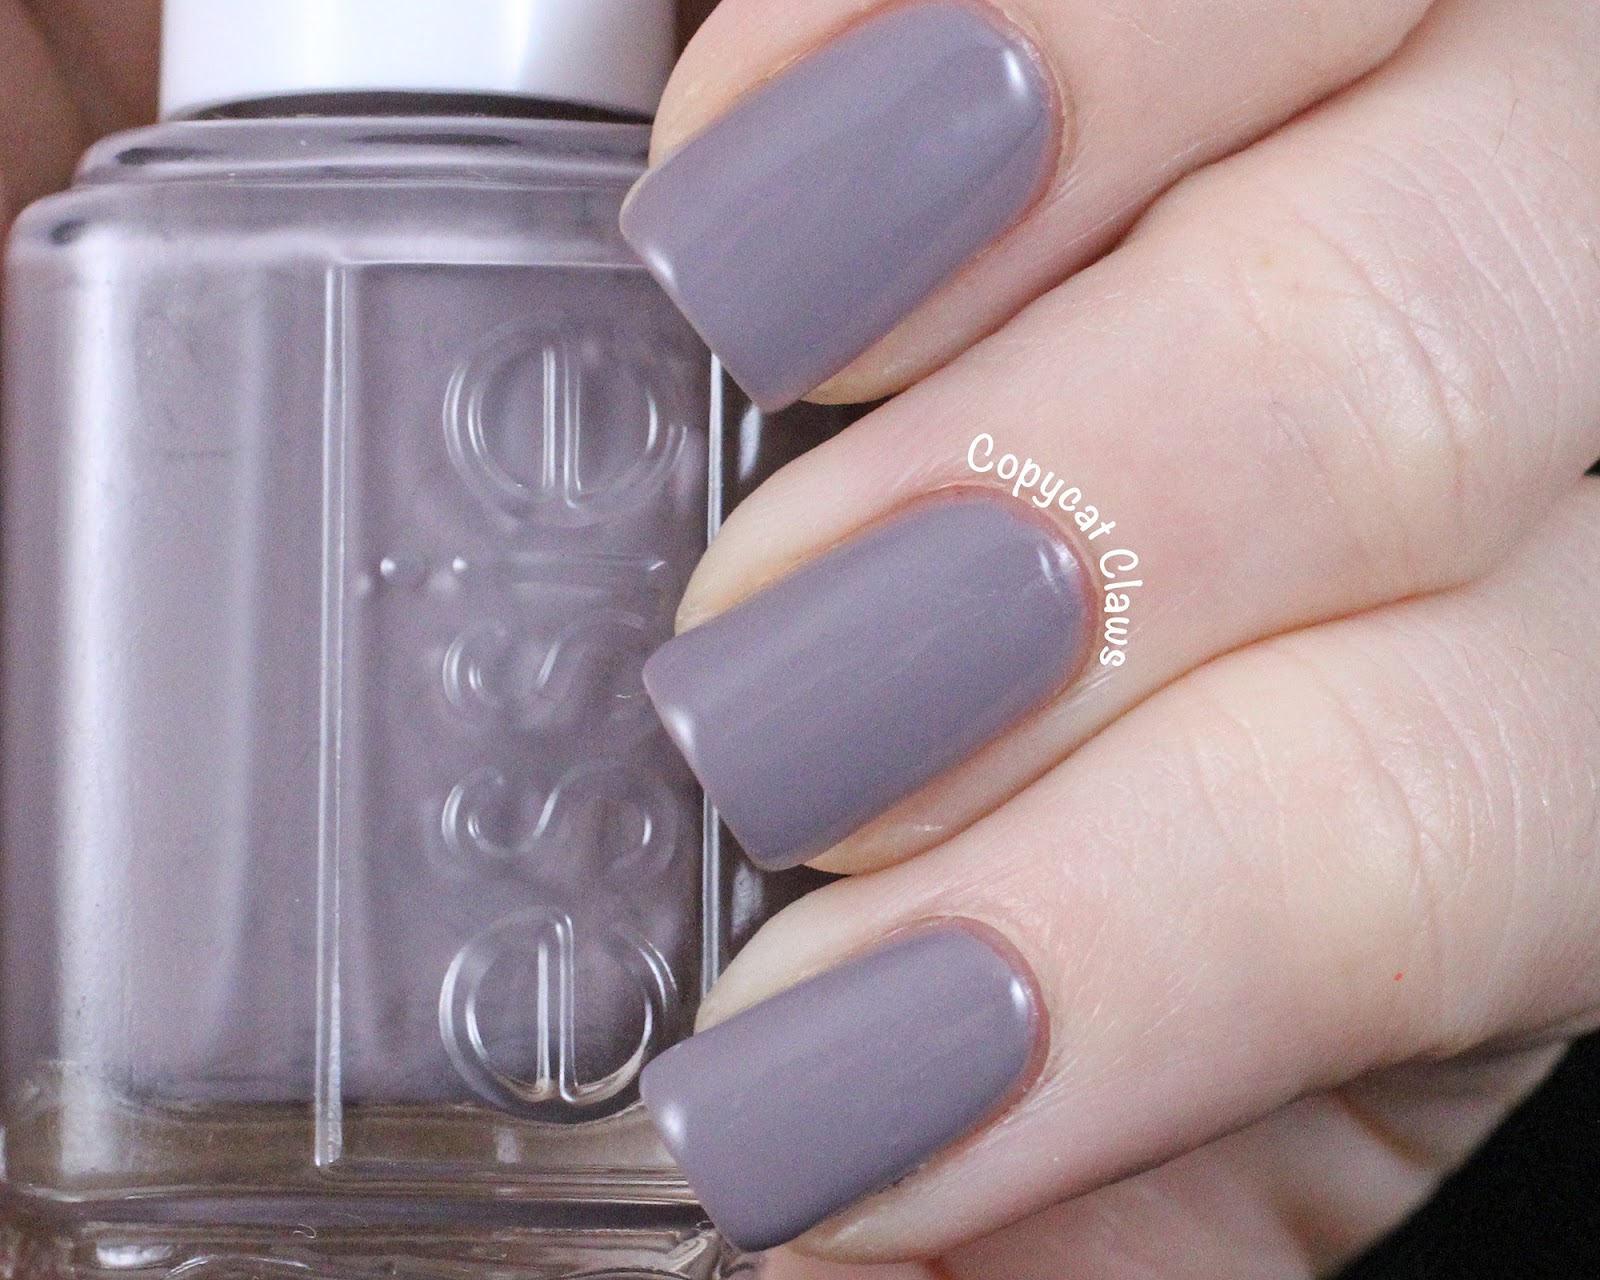 2. Essie Nail Polish in "Chinchilly" - wide 3